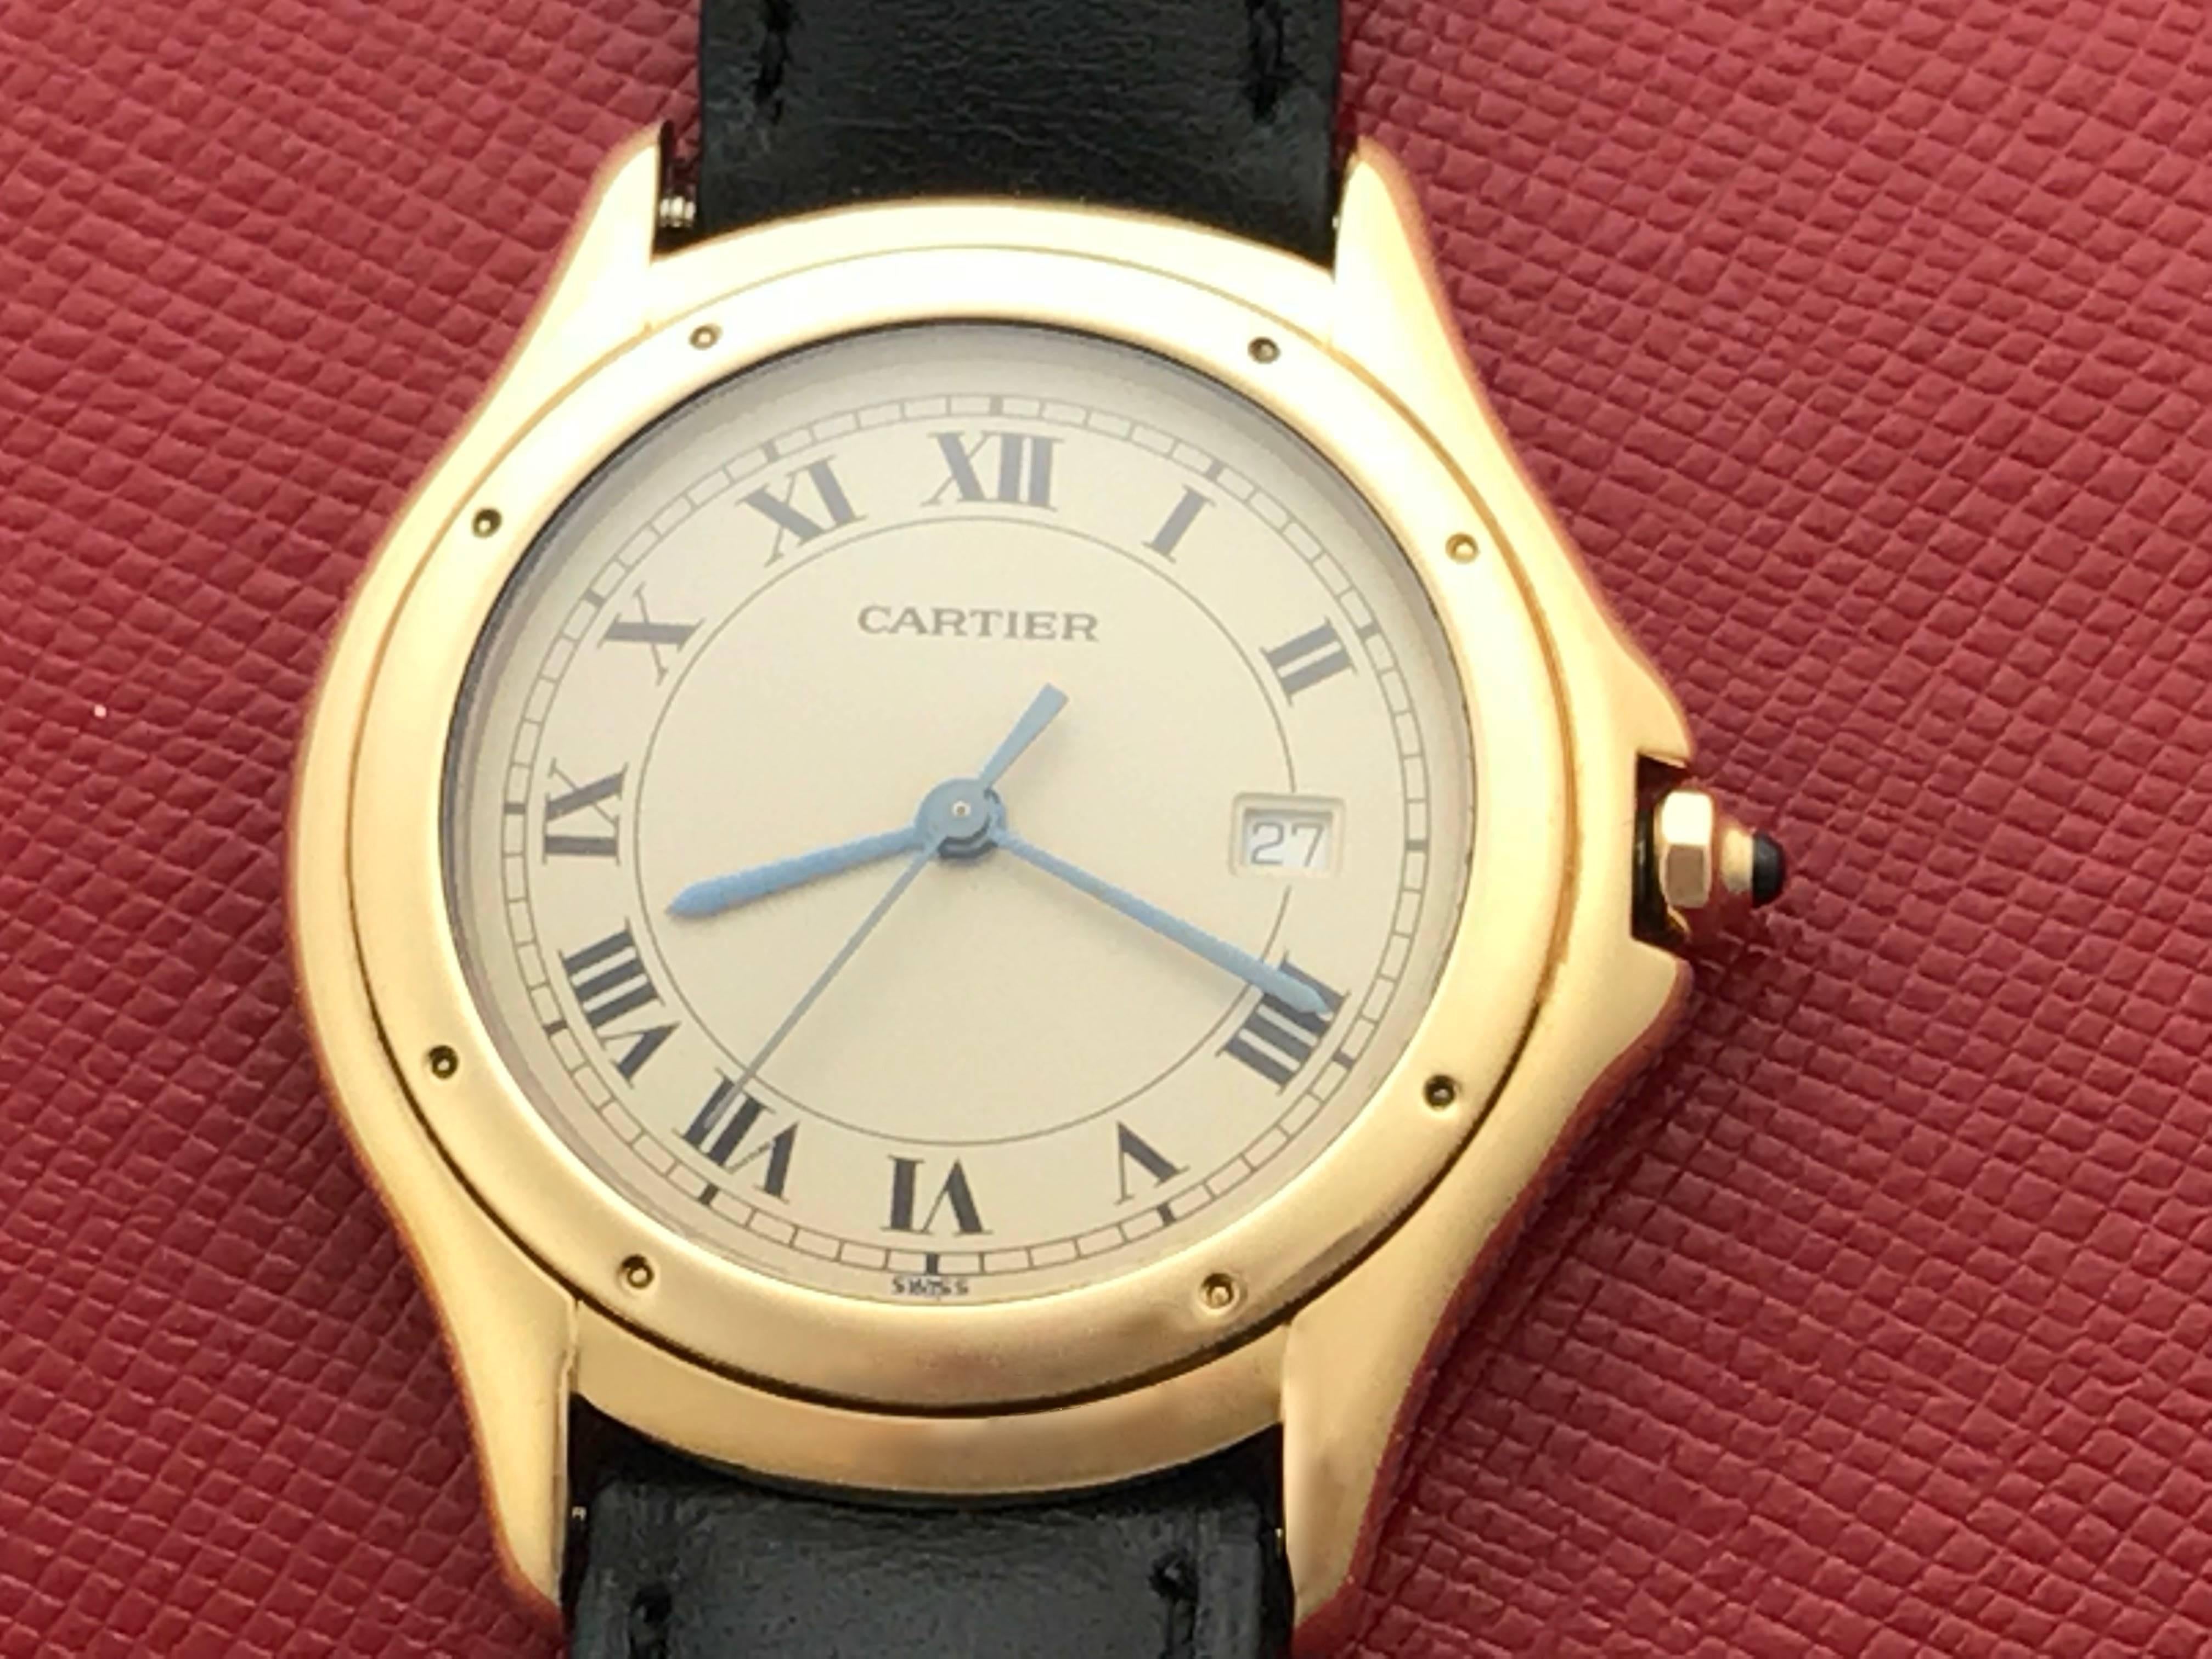 Cartier Cougar Ladies 18K Yellow Gold Quartz Wrist Watch.  Certified pre-owned and ready to ship.  Quartz movement with date.  18k Yellow Gold round style case with blue cabachon sapphire crown. (33mm)  Black leather strap with yellow gold filled